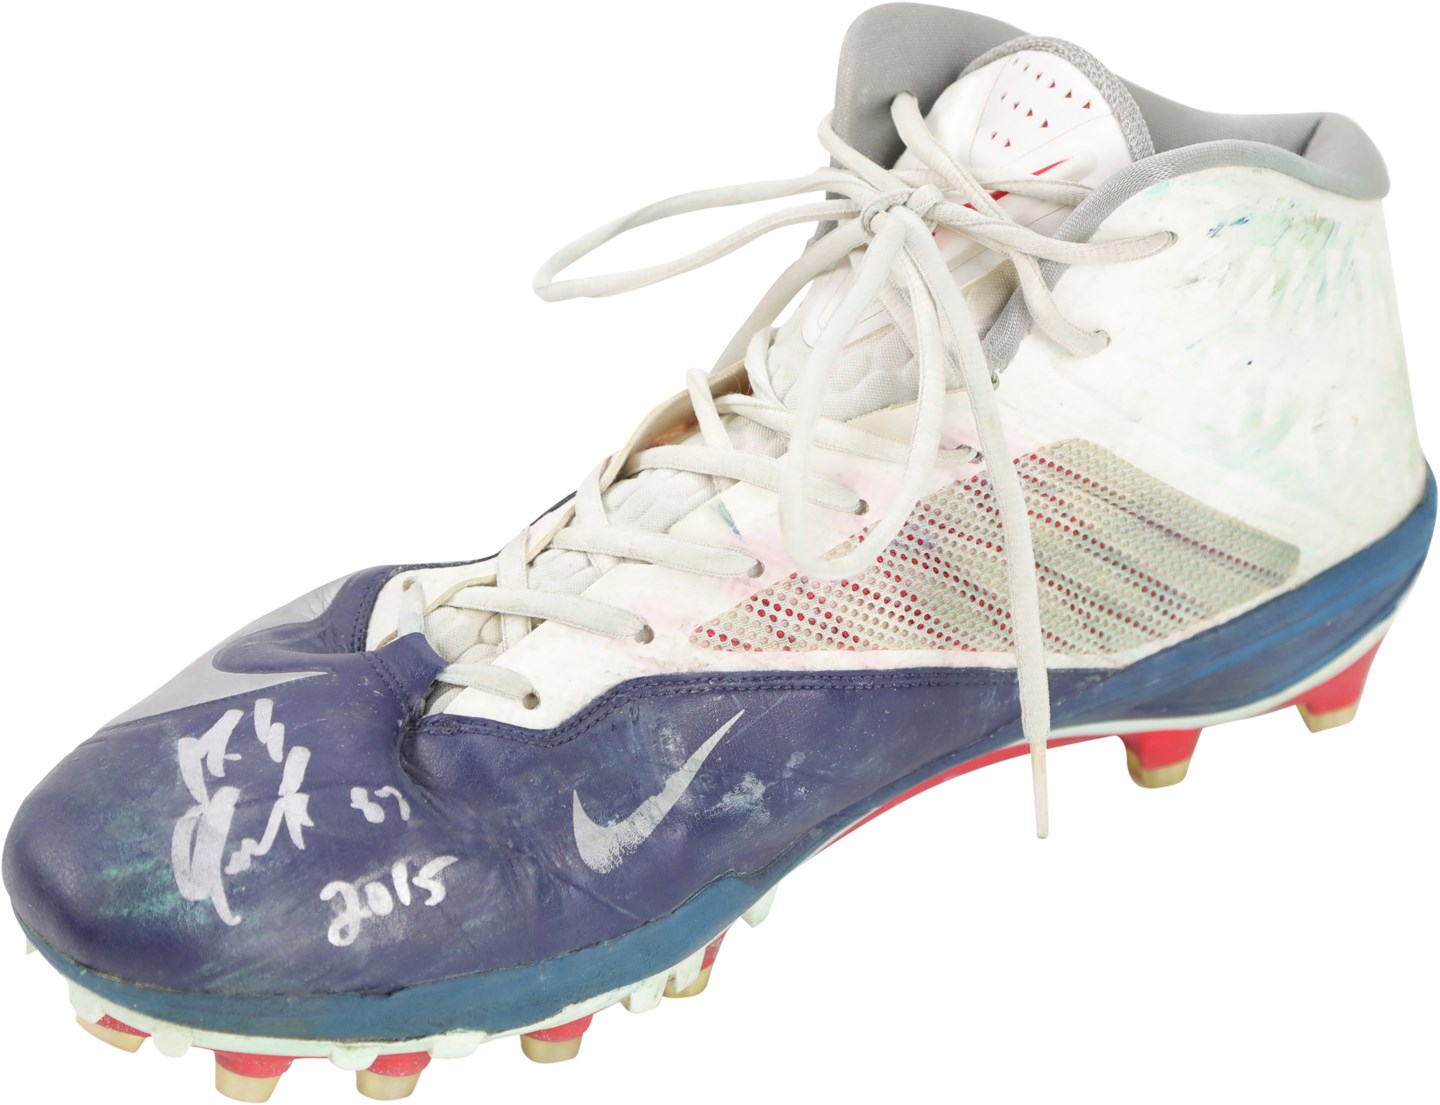 - 2015 Rob Gronkowski New England Patriots Signed Game Worn Cleat (Beckett)